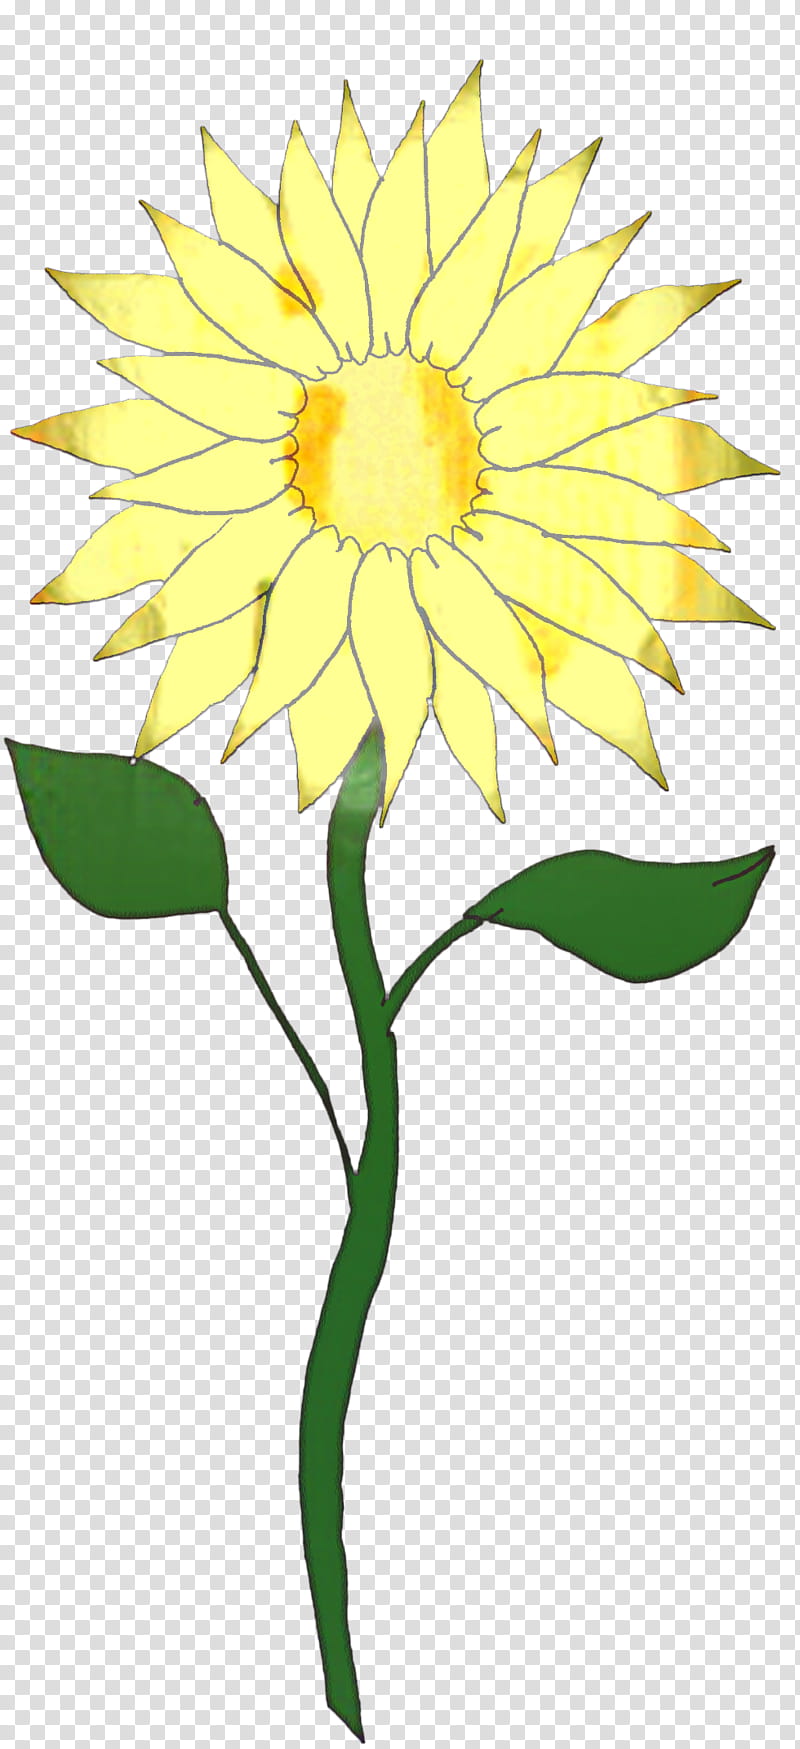 Drawing Of Family, Silhouette, Sunflower, BORDERS AND FRAMES, Common Sunflower, Blog, Yellow, Plant transparent background PNG clipart